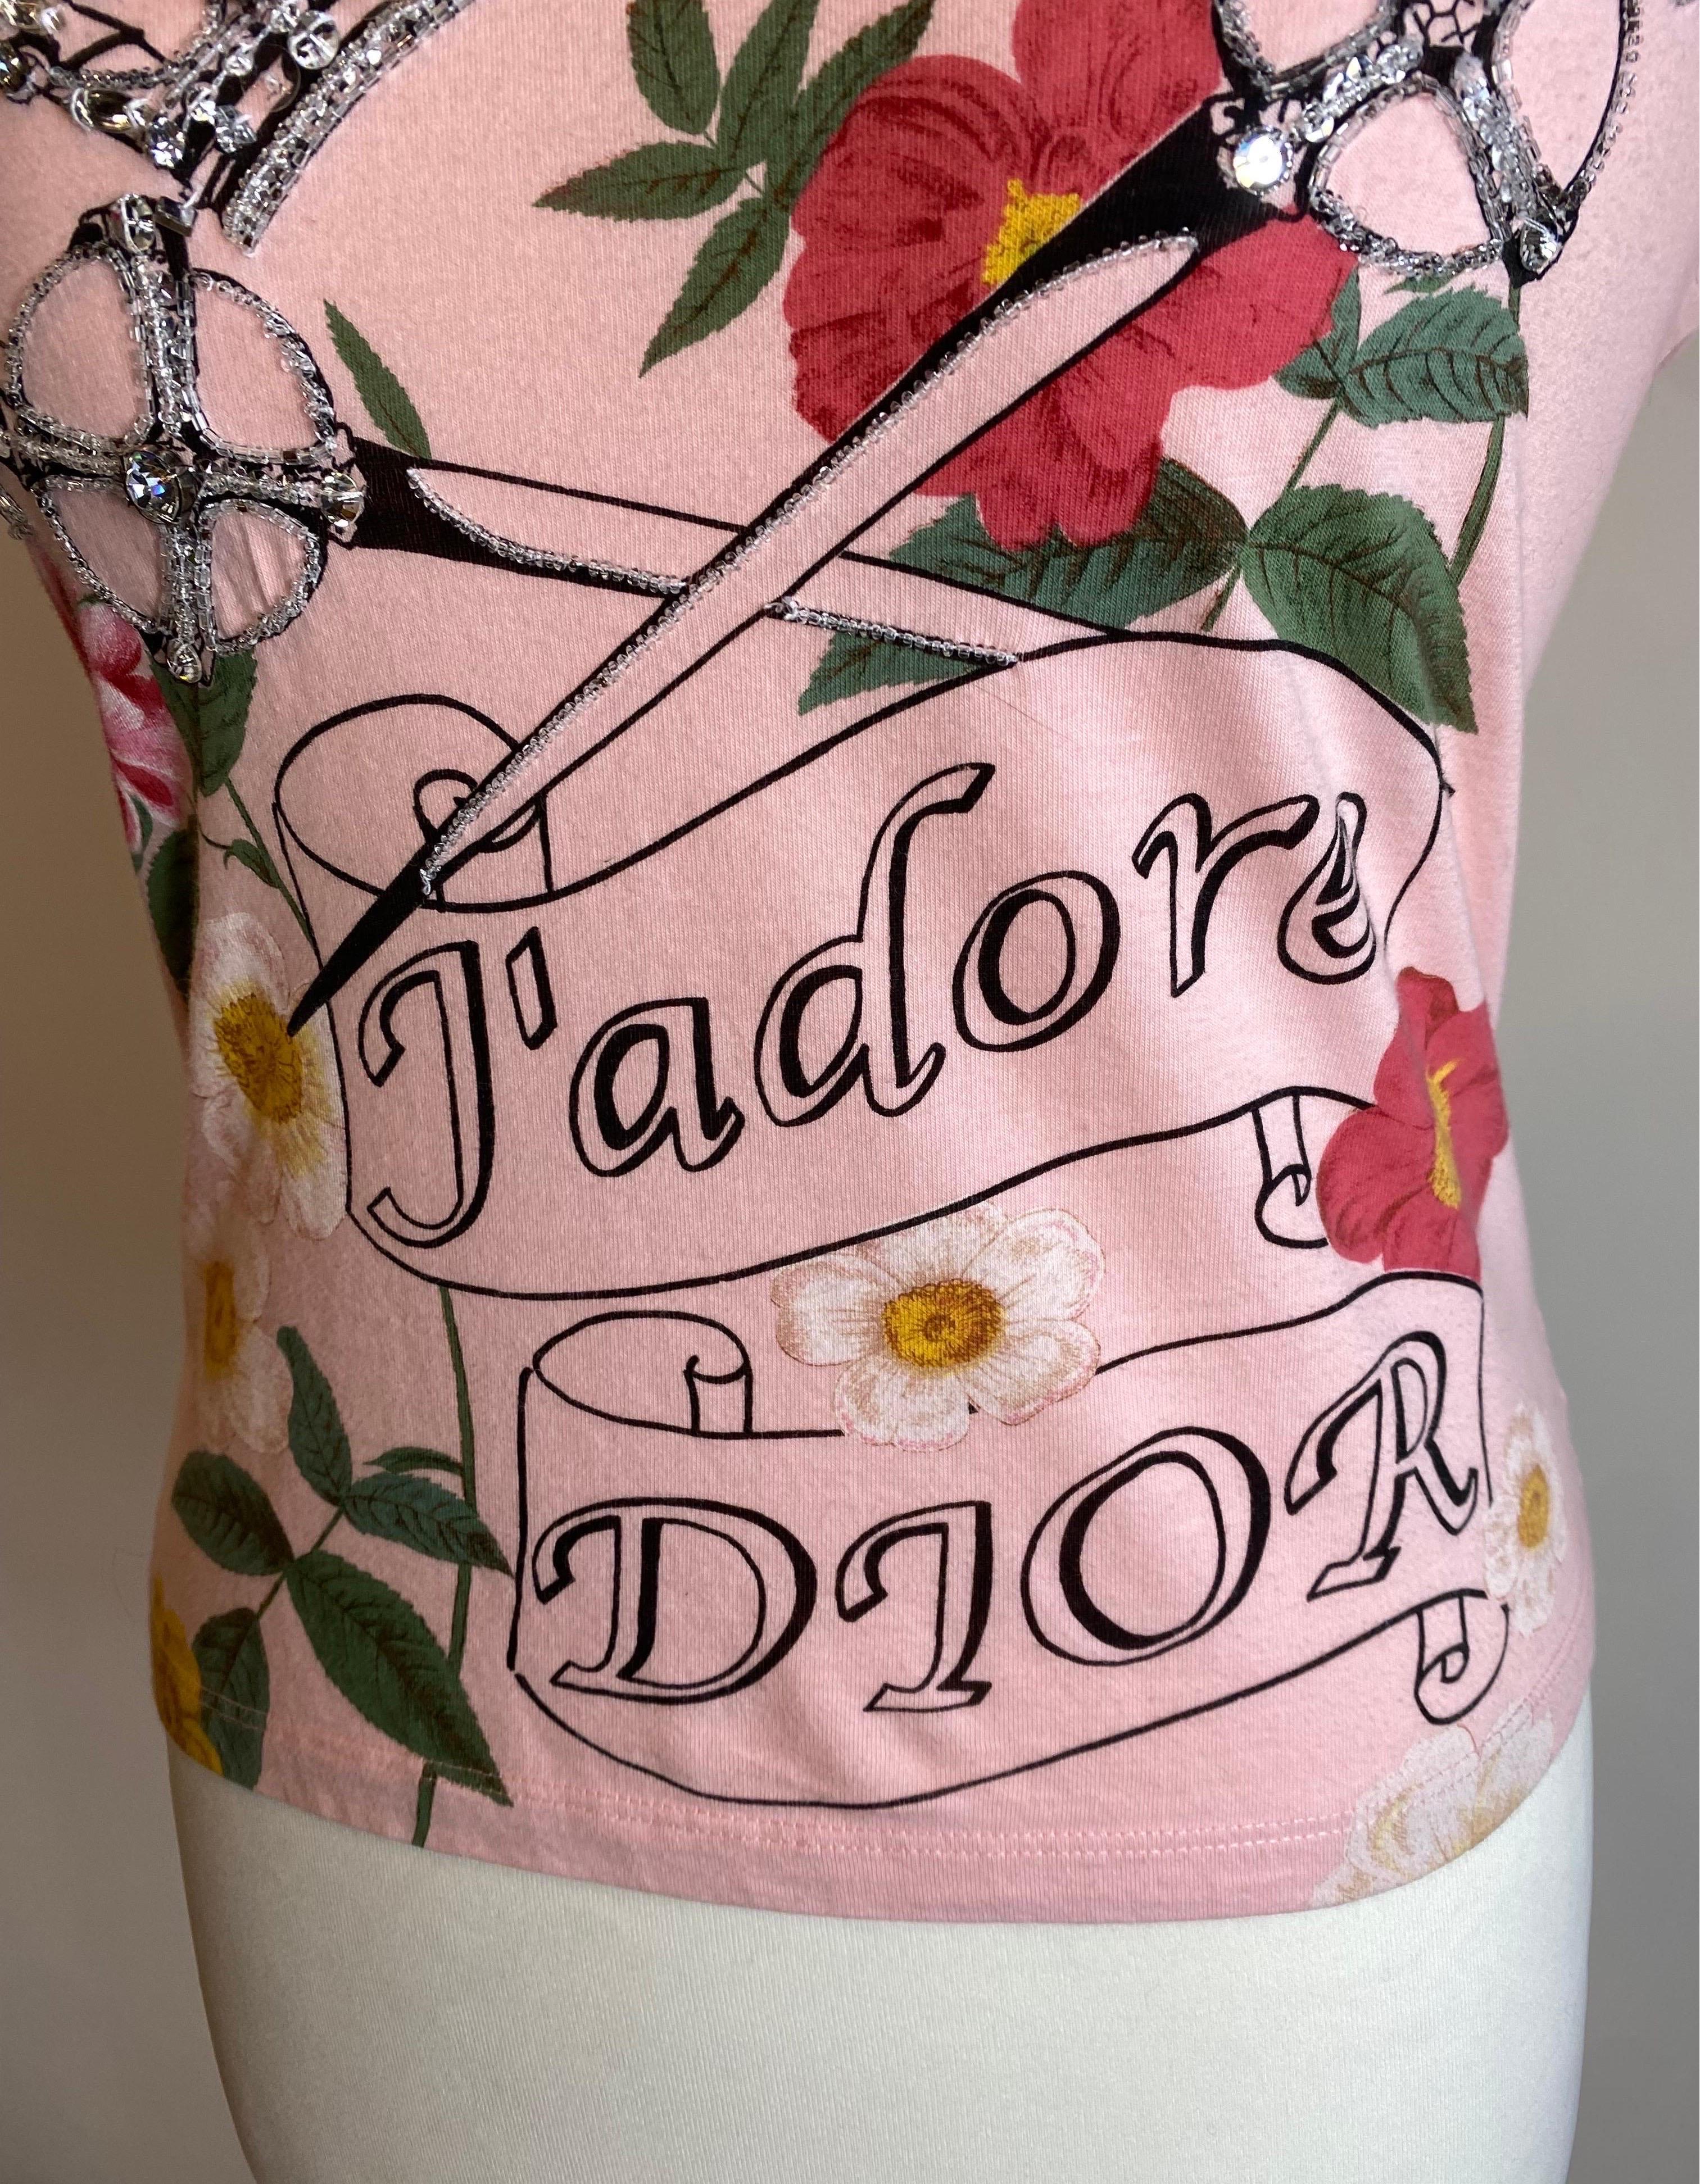 J adore Dior t-shirt.
Fall winter 2003 by John Galliano.
In cotton with bead and rhinestone embroidery.
Size 40 French.
Shoulders 40 cm
Bust 42 cm
Length 56 cm
Good general condition with more signs of use. Has some light blackening along the